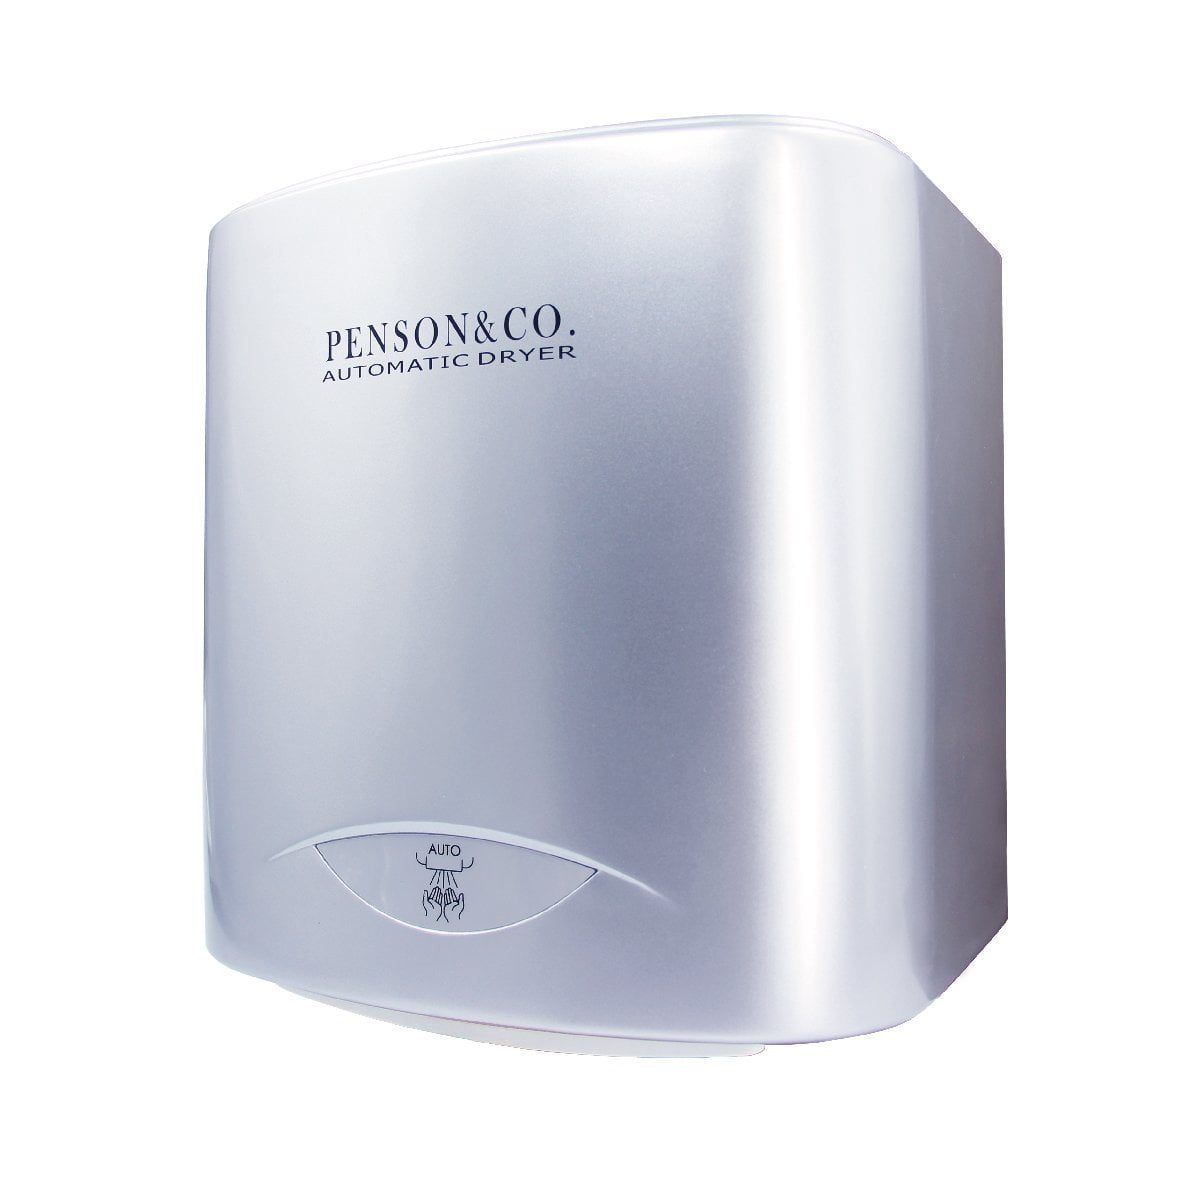 Instant Heat & Dry Ultrathin Automatic Electric Hand Dryer Commercial High Speed PENSON & CO for Bathroom K2016